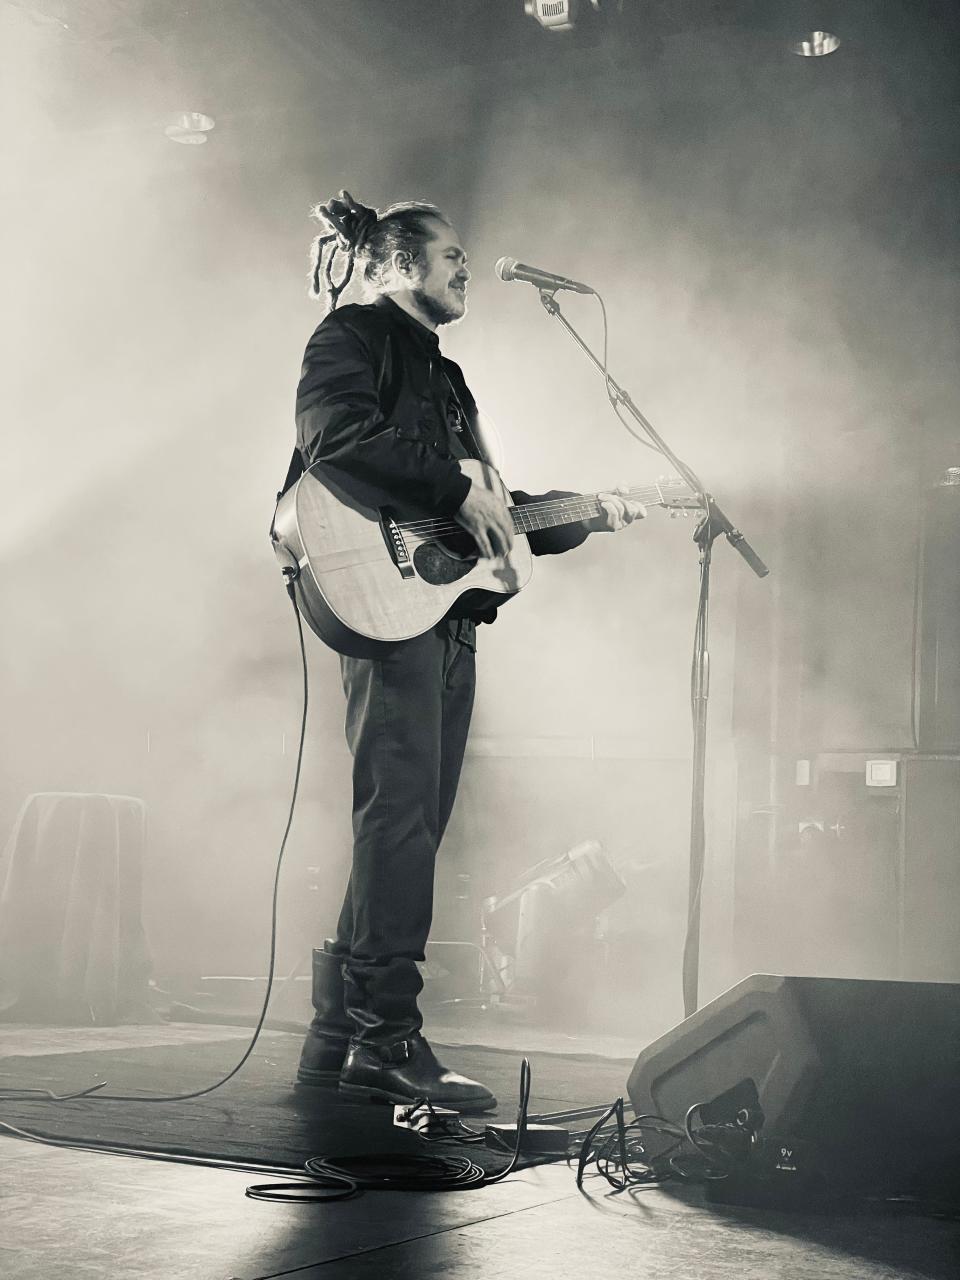 Citizen Cope will perform a concert on Tuesday, Jan. 25 at The Music Hall in Portsmouth.